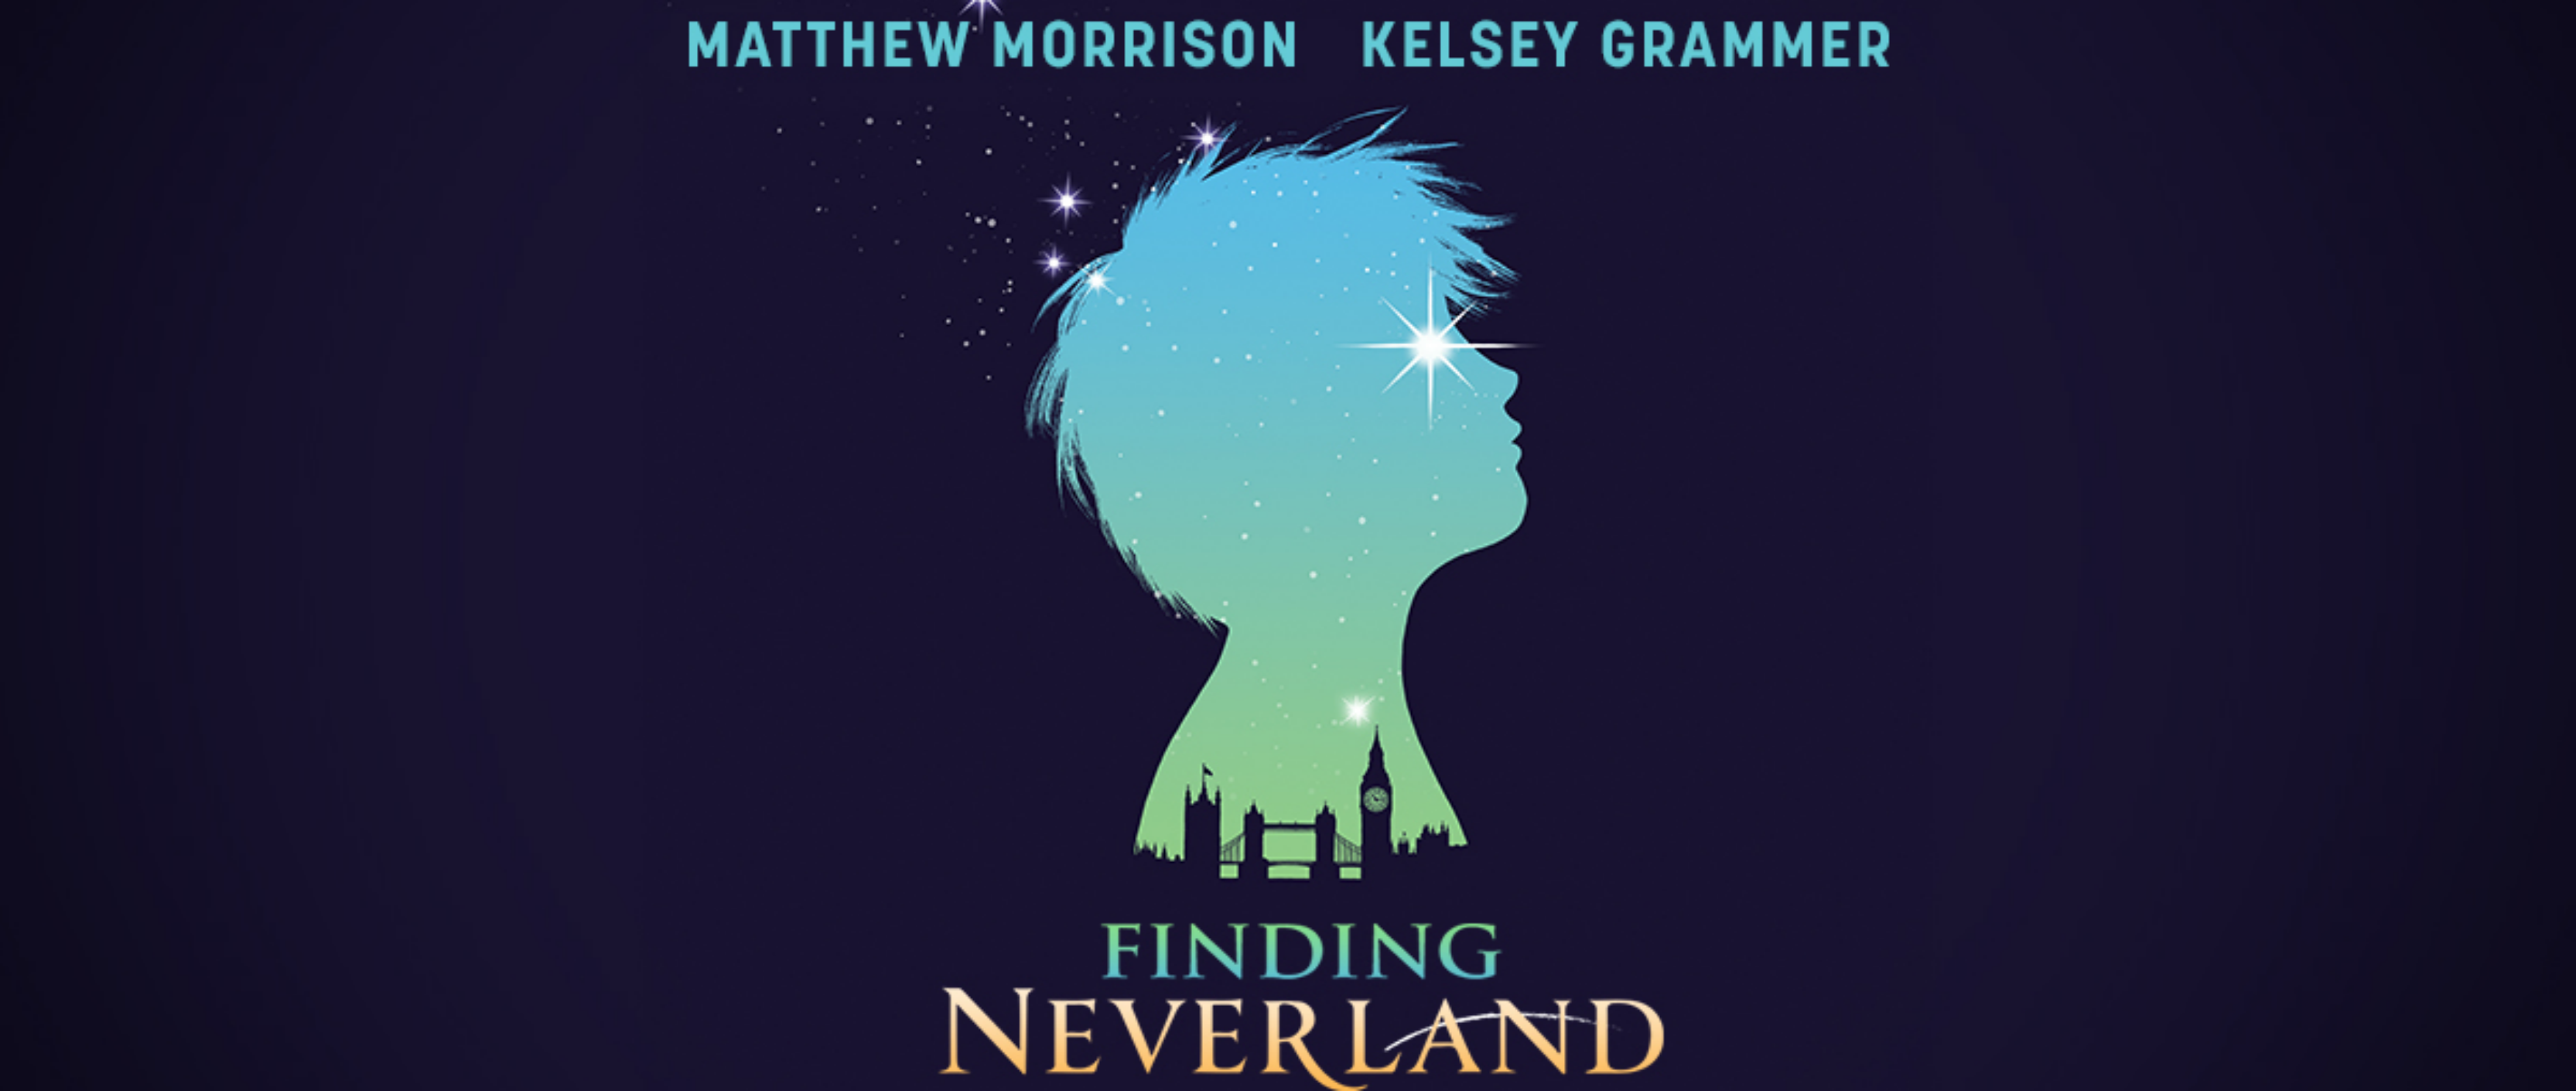 Something about this night from Finding Neverland